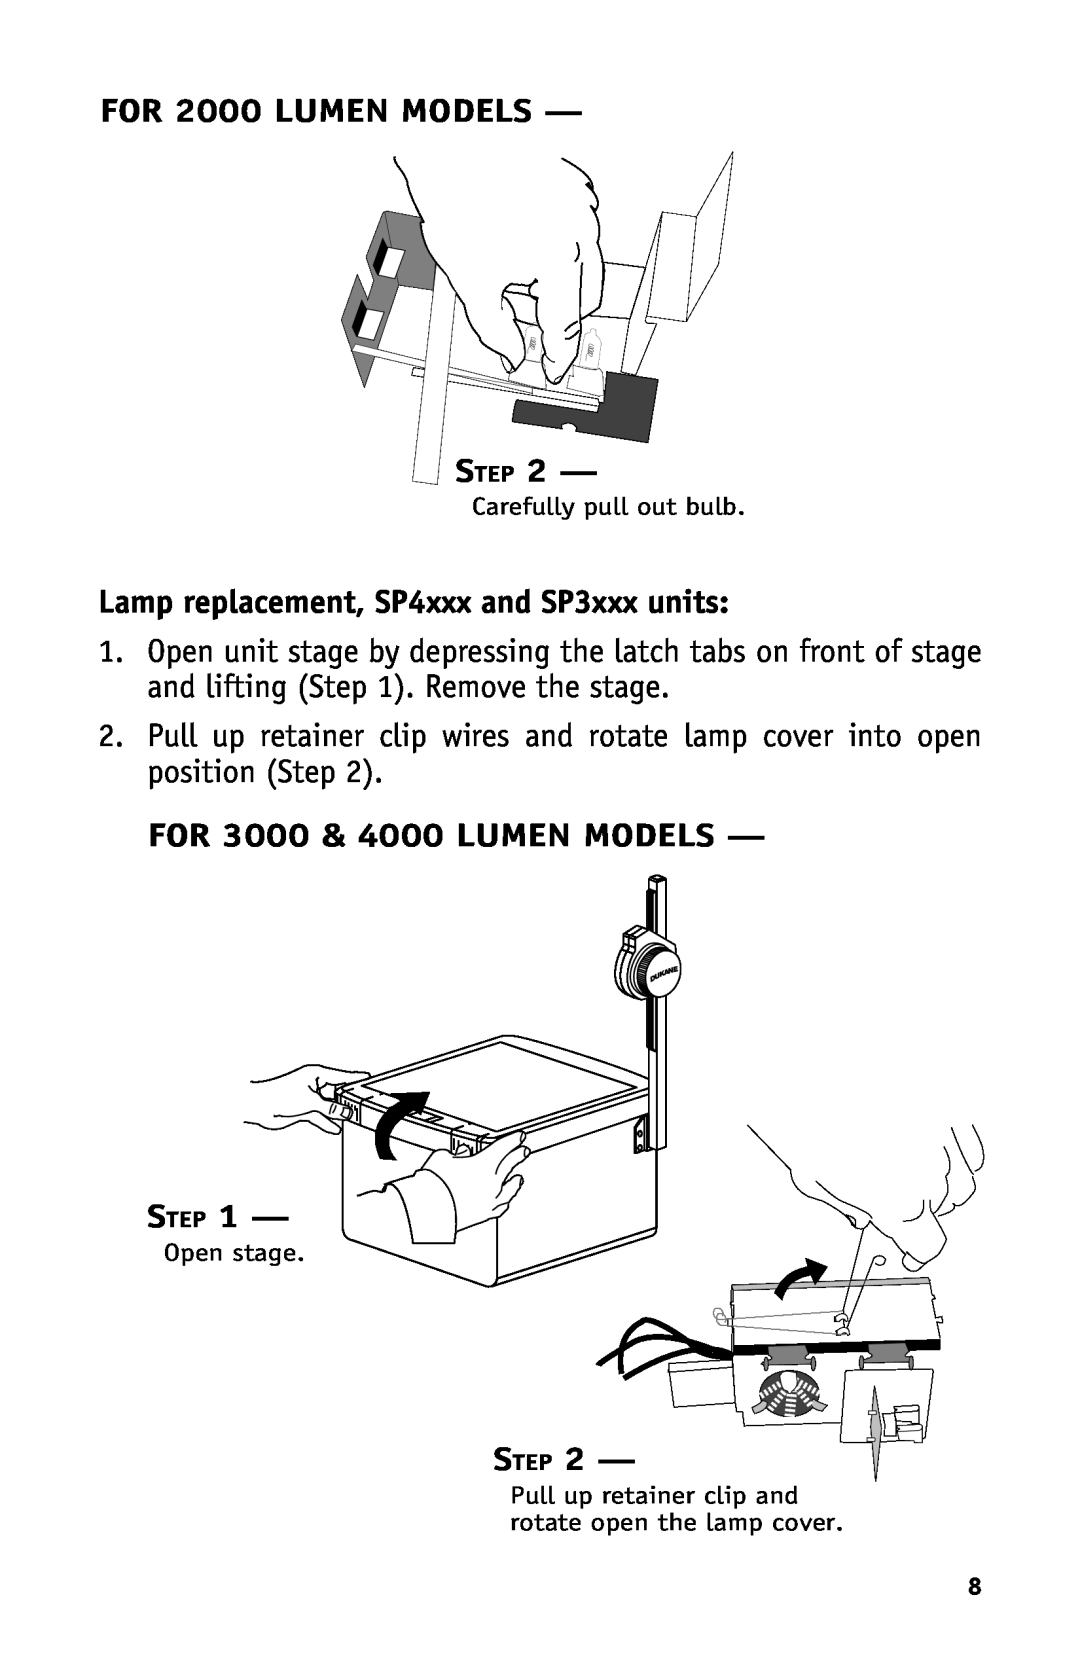 Dukane Projectors manual Lamp replacement, SP4xxx and SP3xxx units, FOR 3000 & 4000 LUMEN MODELS STEP, Step, Open stage 